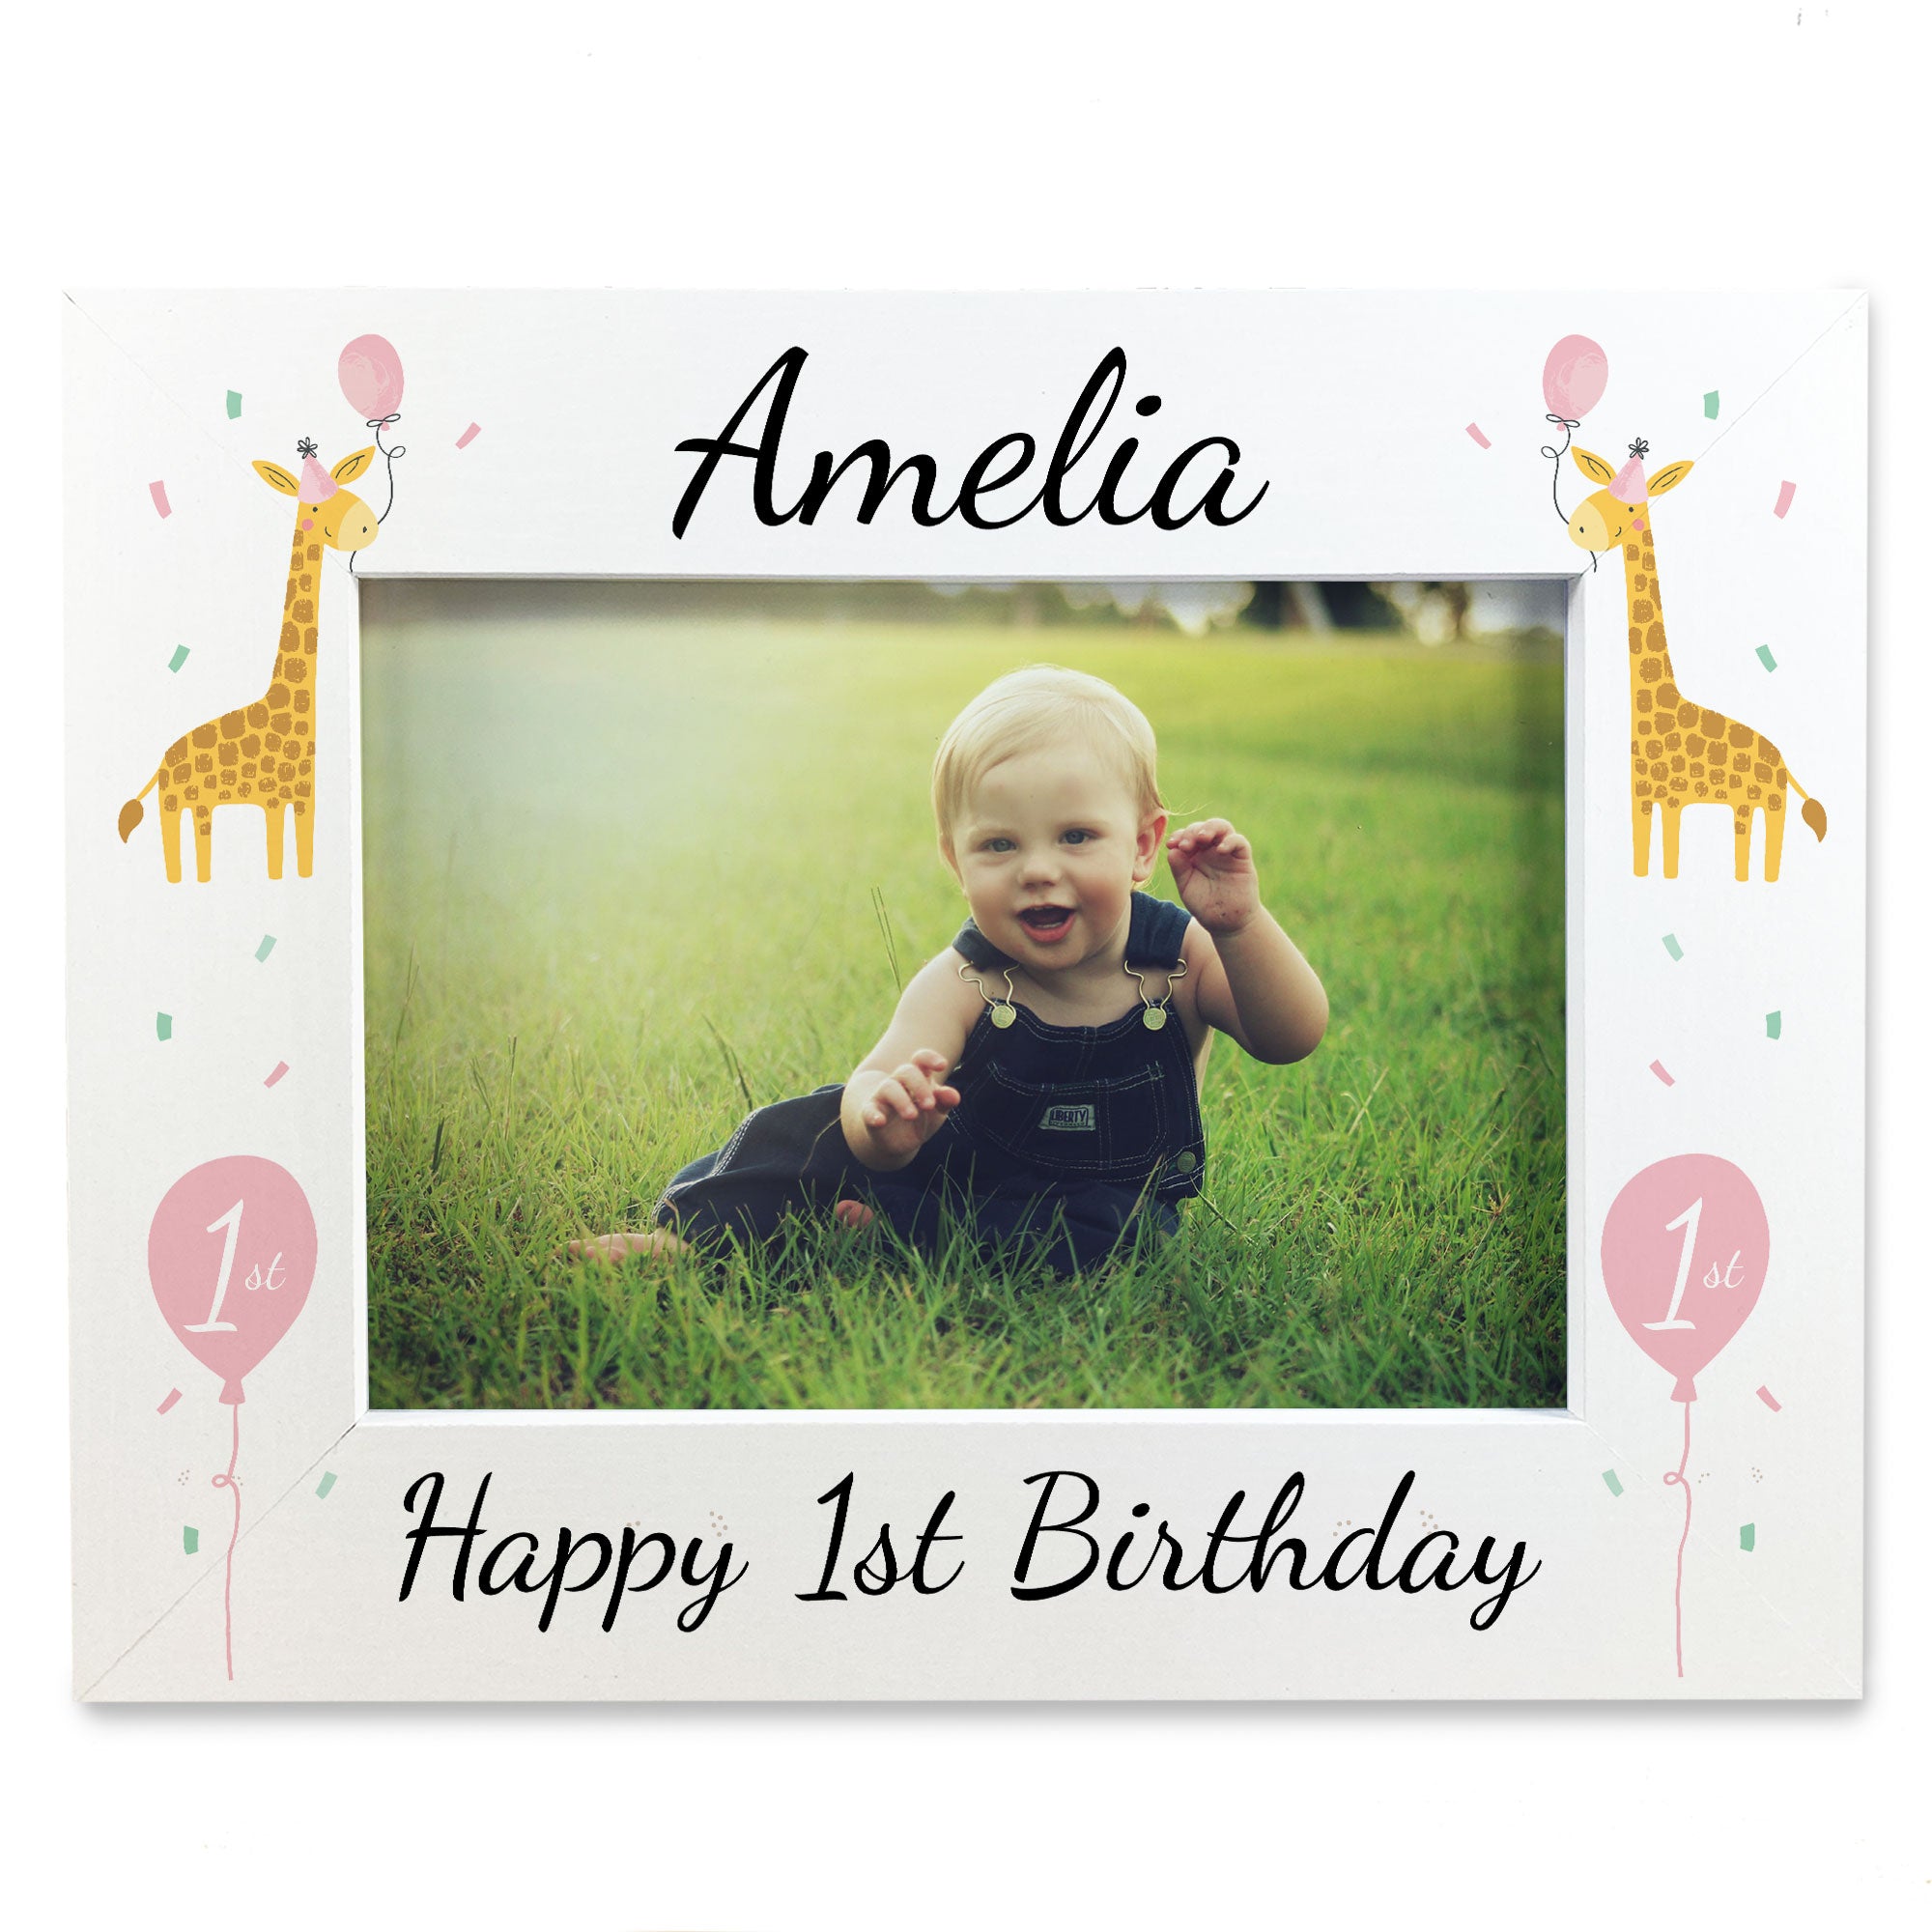 Popular and cute personalised 1st birthday gifts for your baby